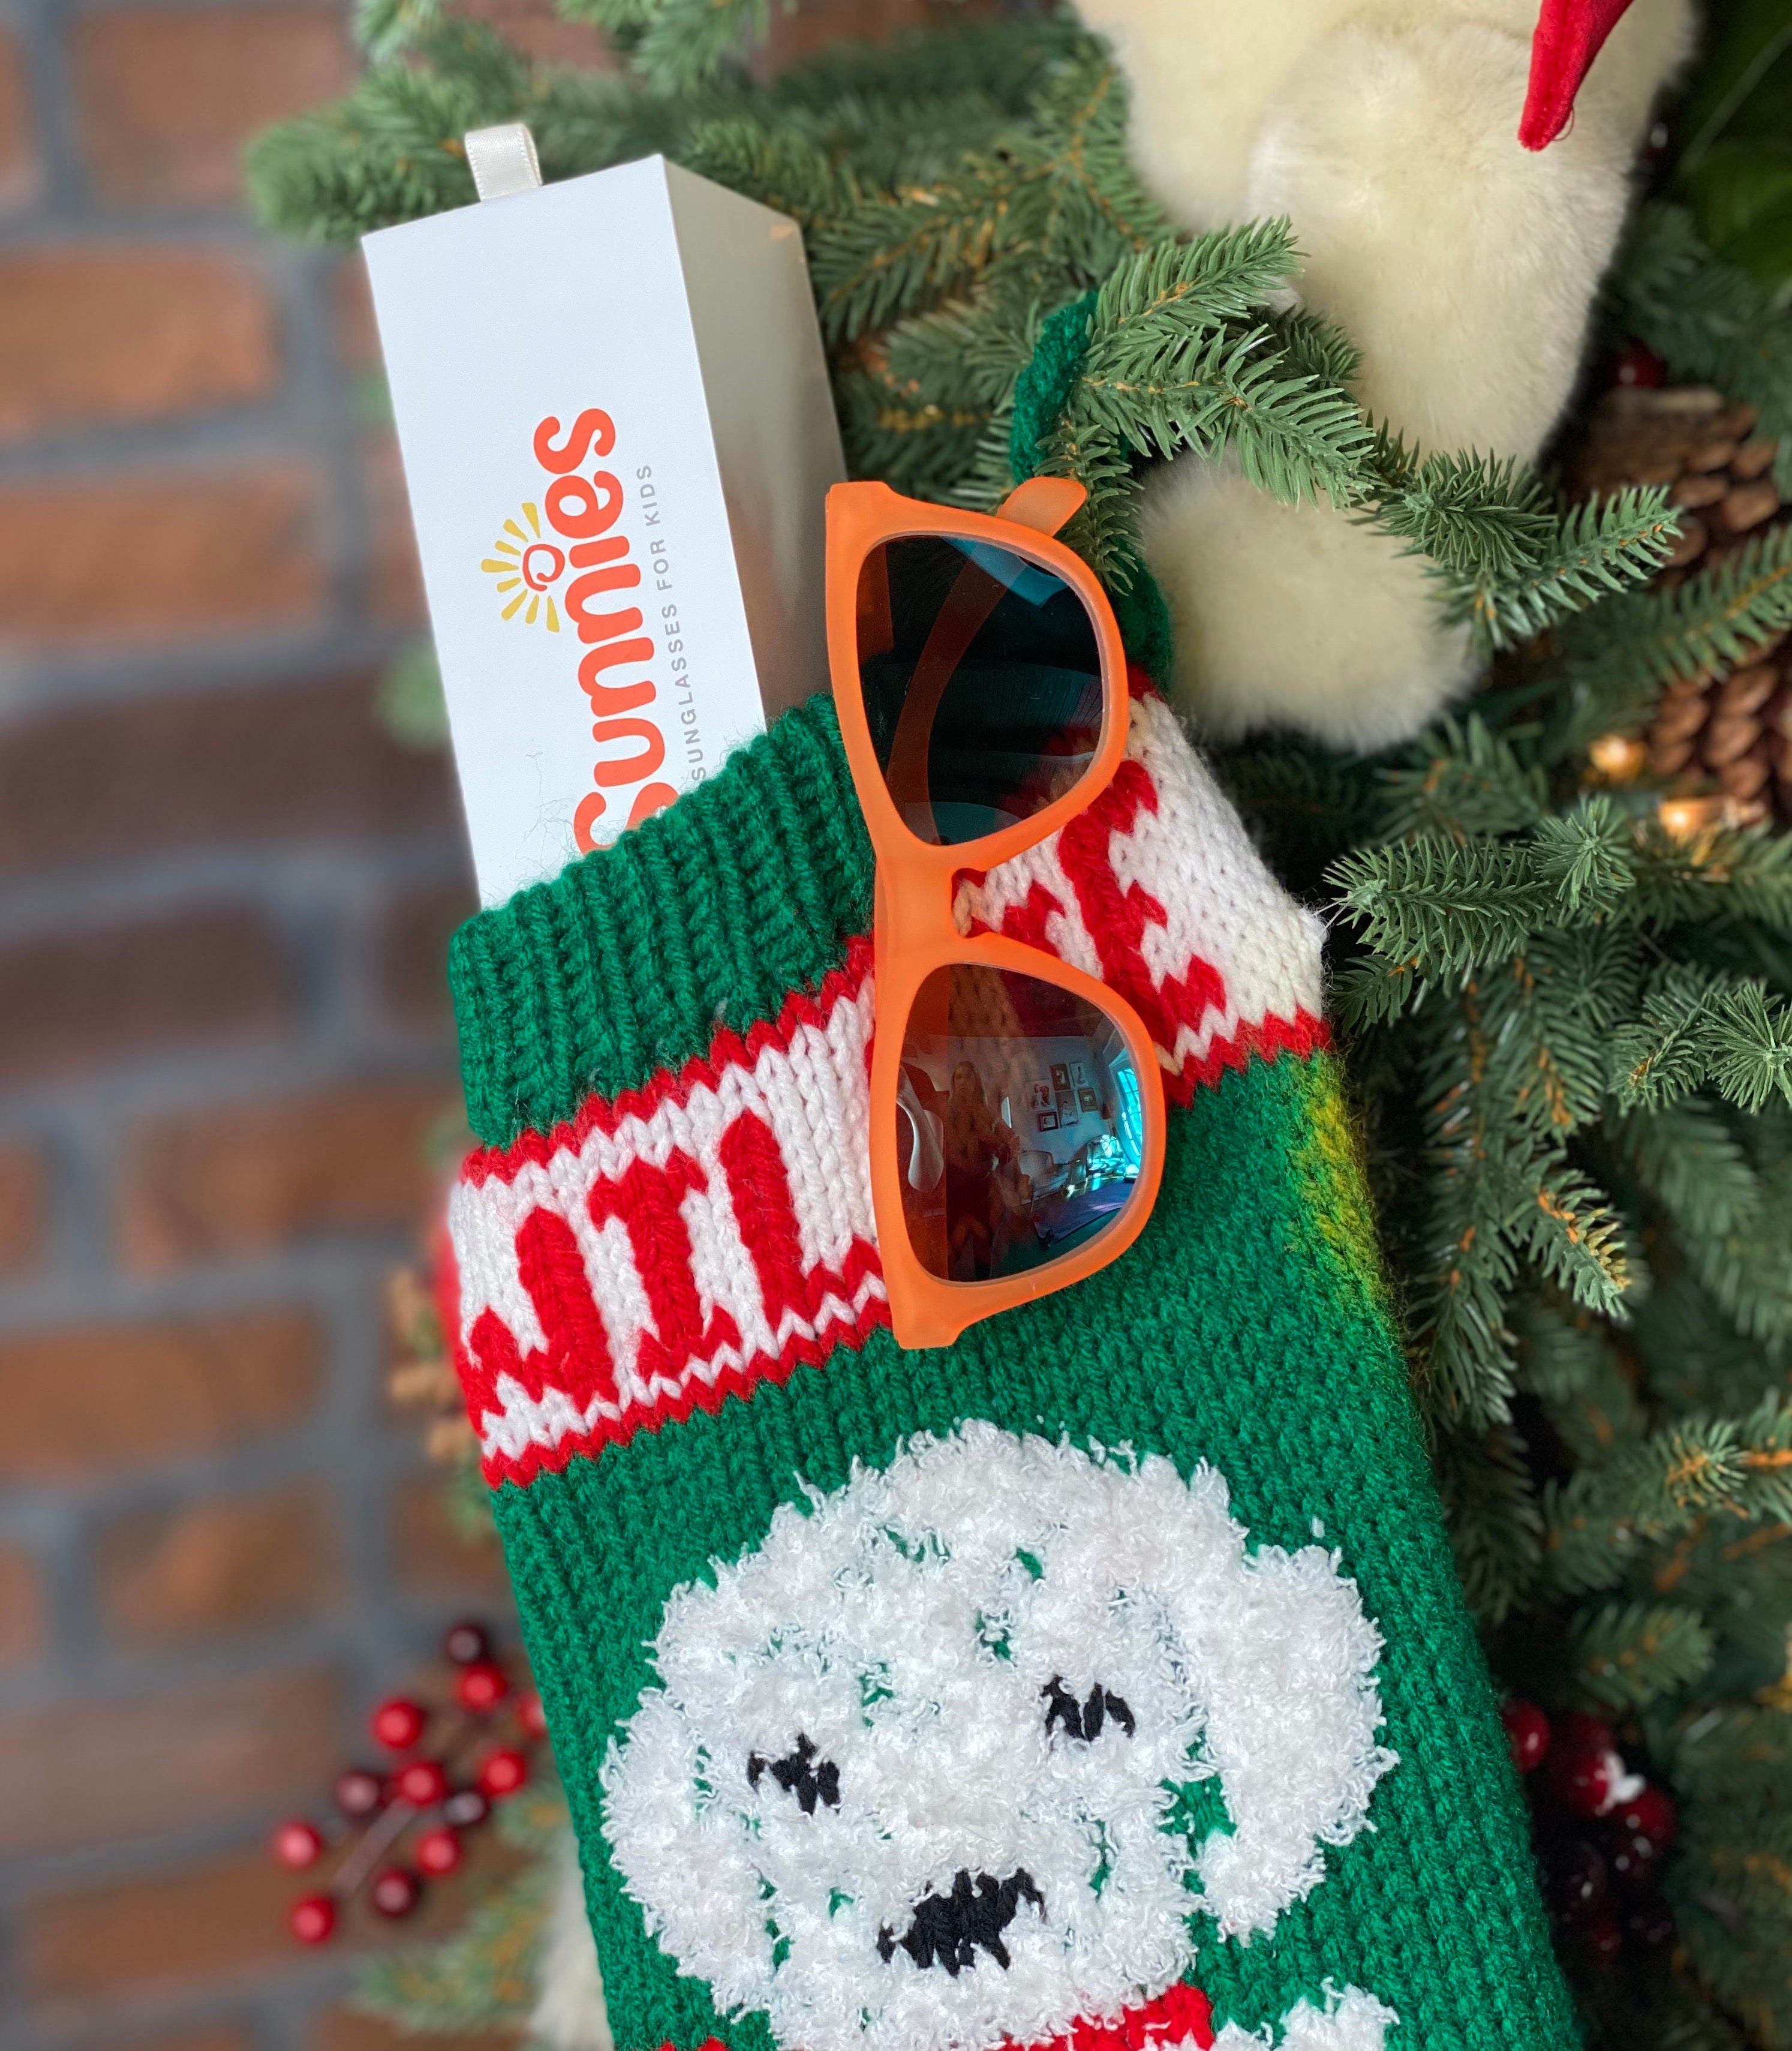 Christmas stocking with a pair of polarized kids sunglasses in an orange frame by Sunnies Shades sticking out of the stocking..